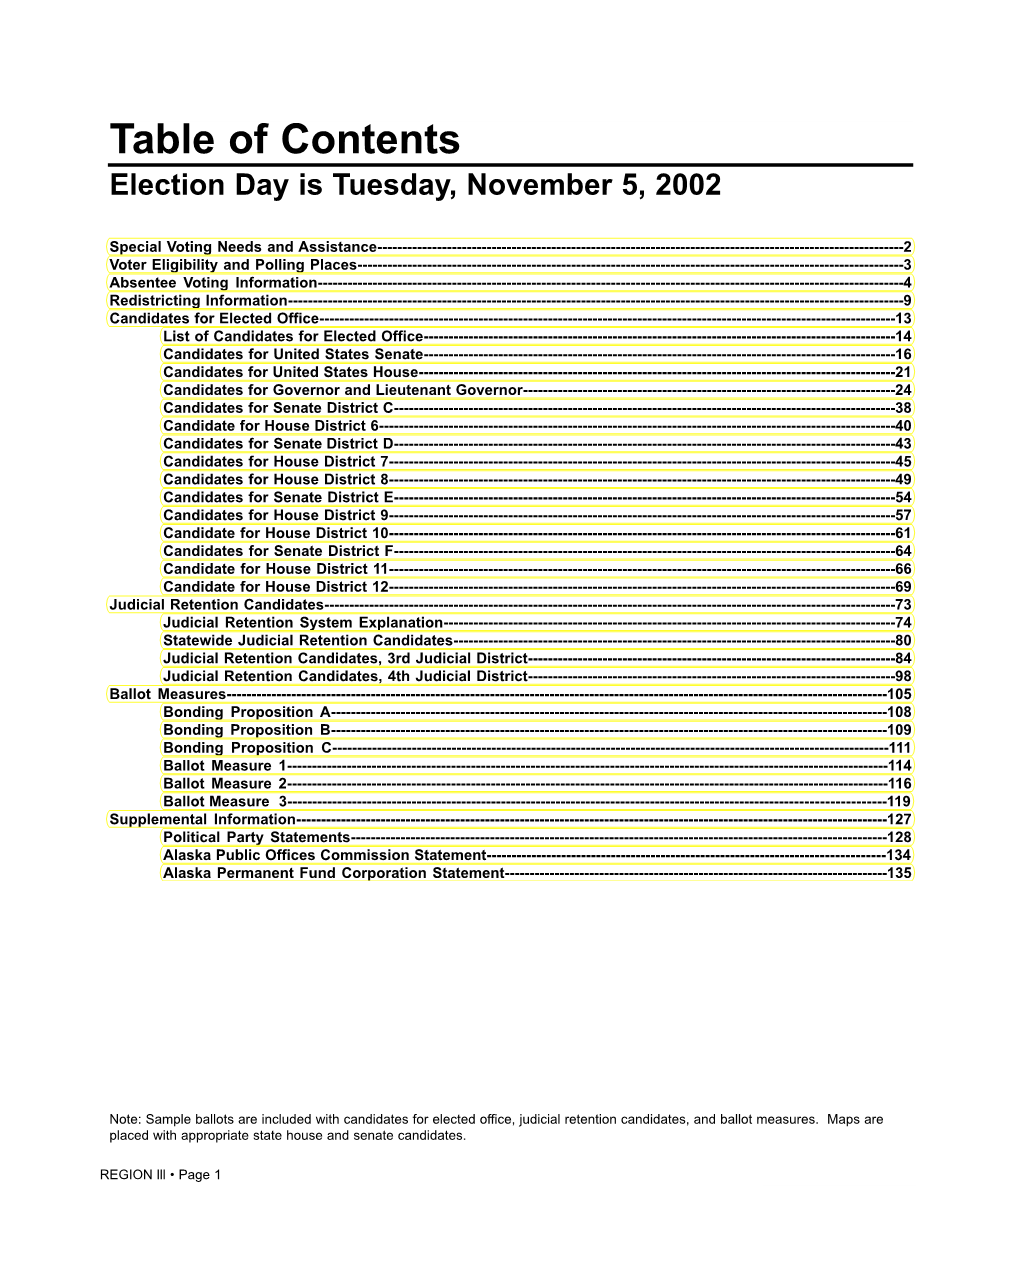 Table of Contents Election Day Is Tuesday, November 5, 2002